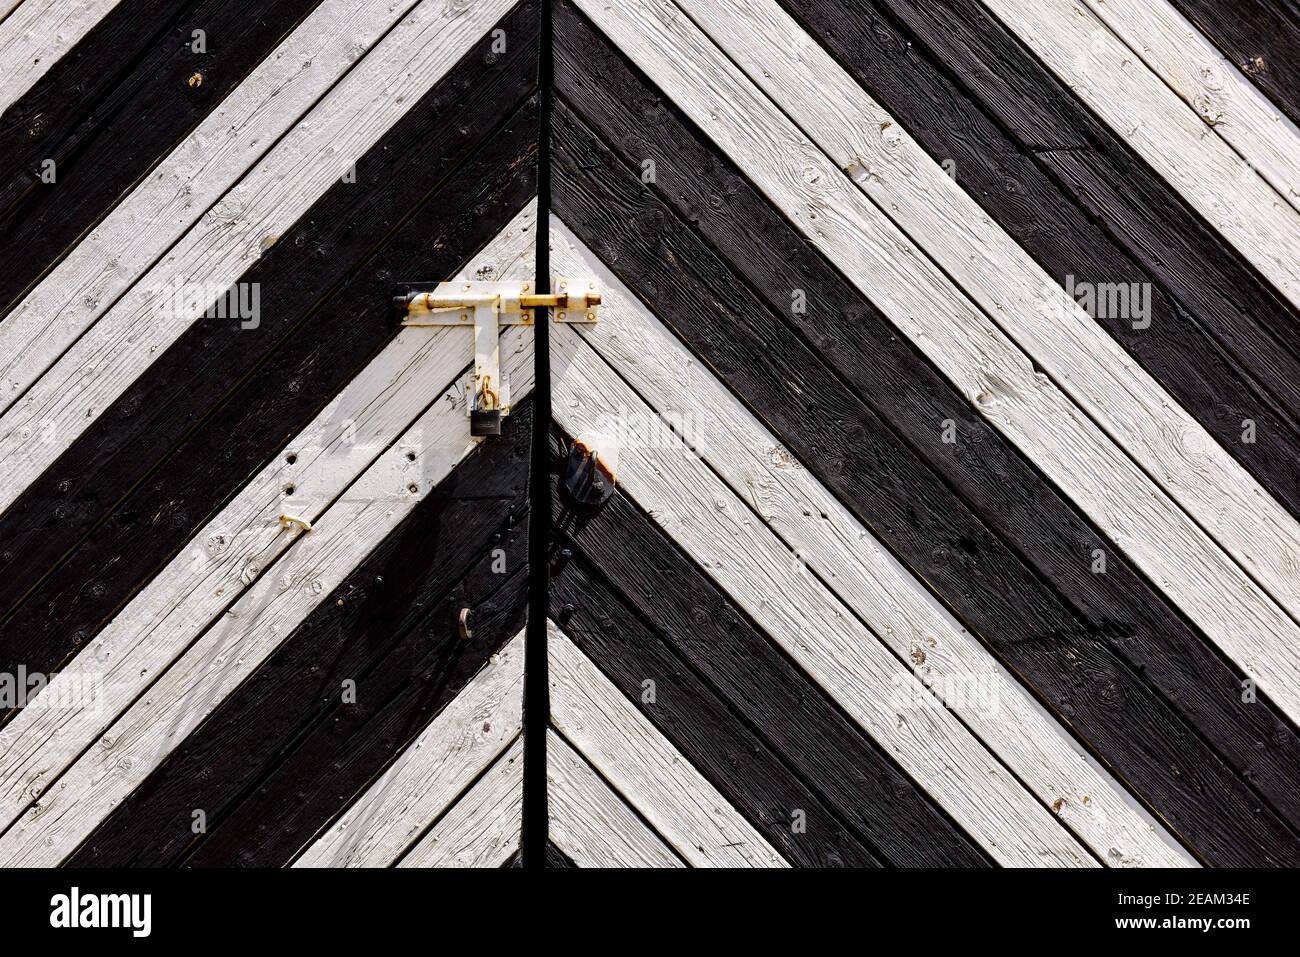 Wooden background. Detail of old wooden gates, doors with cracked paint. Black and white old wooden planks Stock Photo